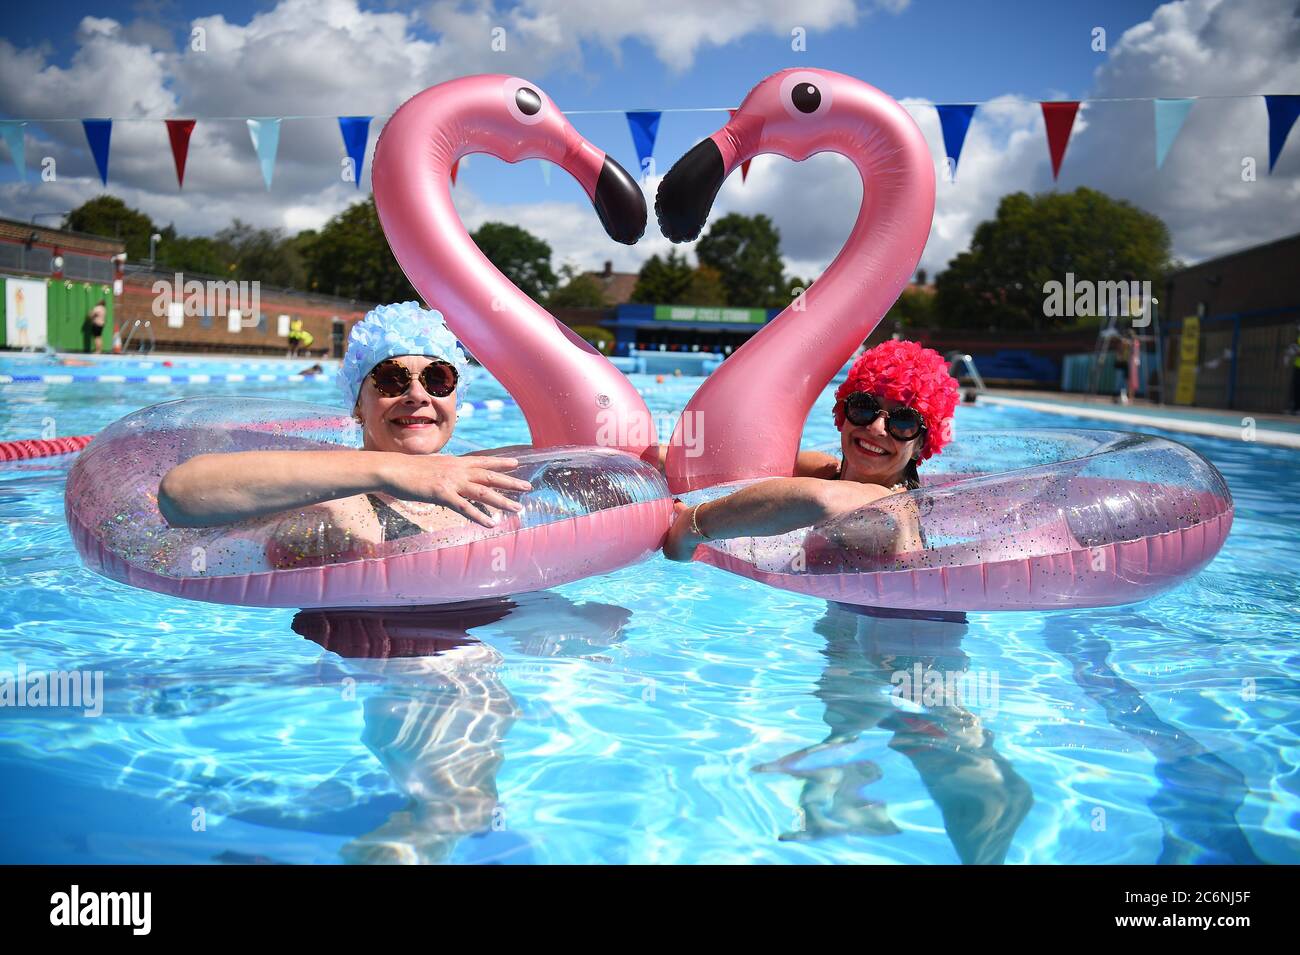 Swimmers Nicola Foster (left), 55, and Jessica Walker, 56, enjoy the water at Charlton Lido & Lifestyle Club in Hornfair Park, London. Outdoor swimming pools are reopening to the public on Saturday as the easing of coronavirus lockdown restrictions continues in England. Stock Photo